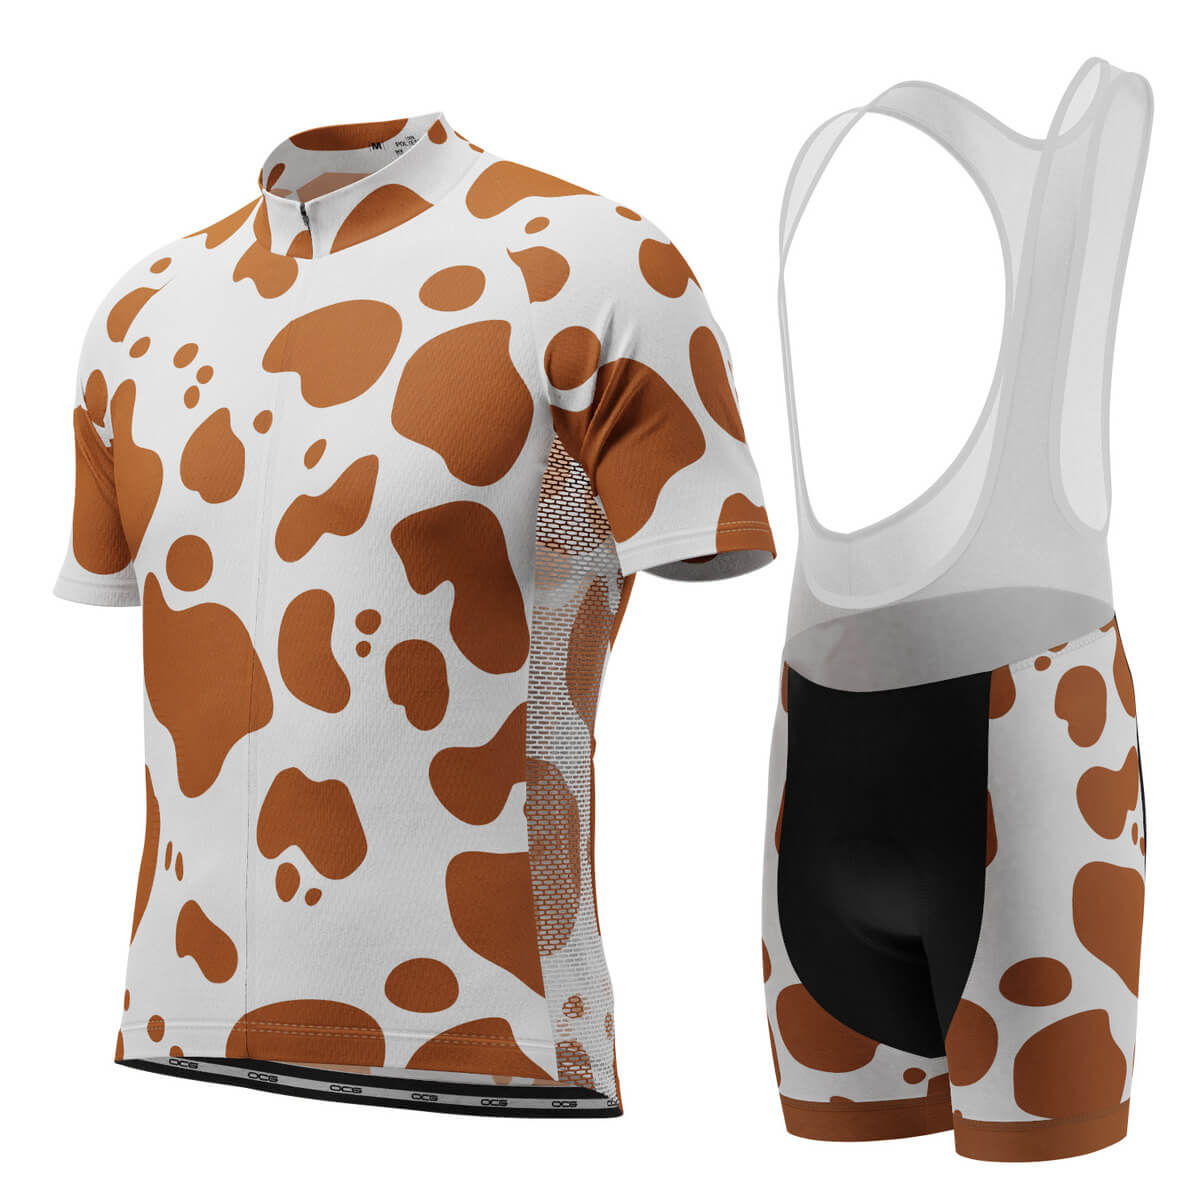 Men's Jersey Cow 2 Piece Cycling Kit